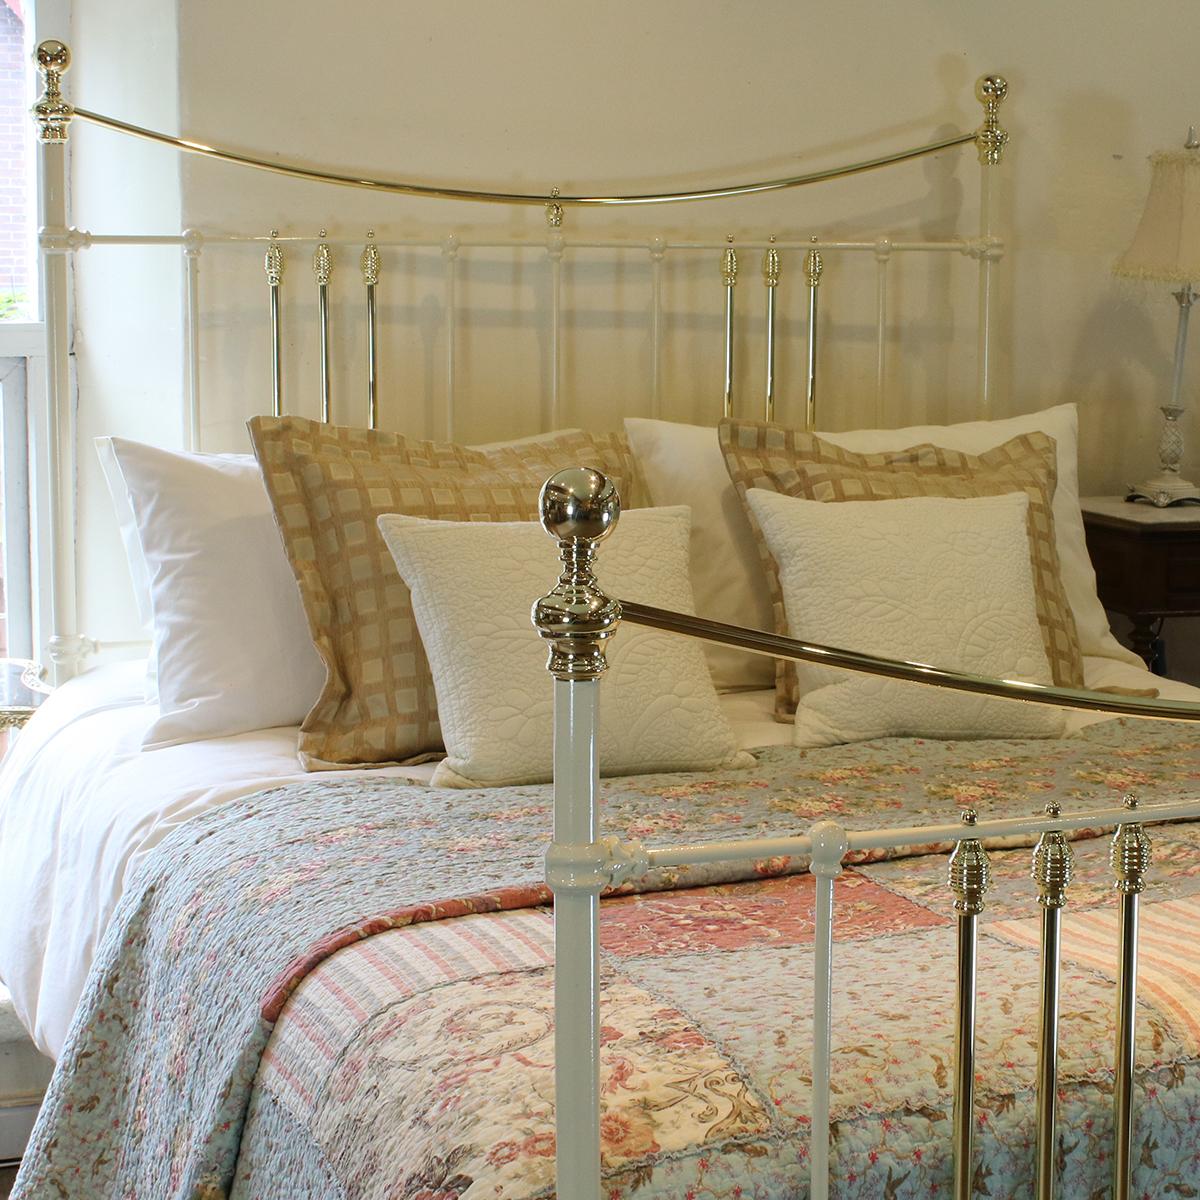 Antique bed in cream with curved brass top rail. 

This bed accepts a UK King size or US Queen size (5ft, 60in or 150cm wide) base and mattress set.

The price is for the bed frames alone. The bases, mattresses, bedding and bed linen are extra.